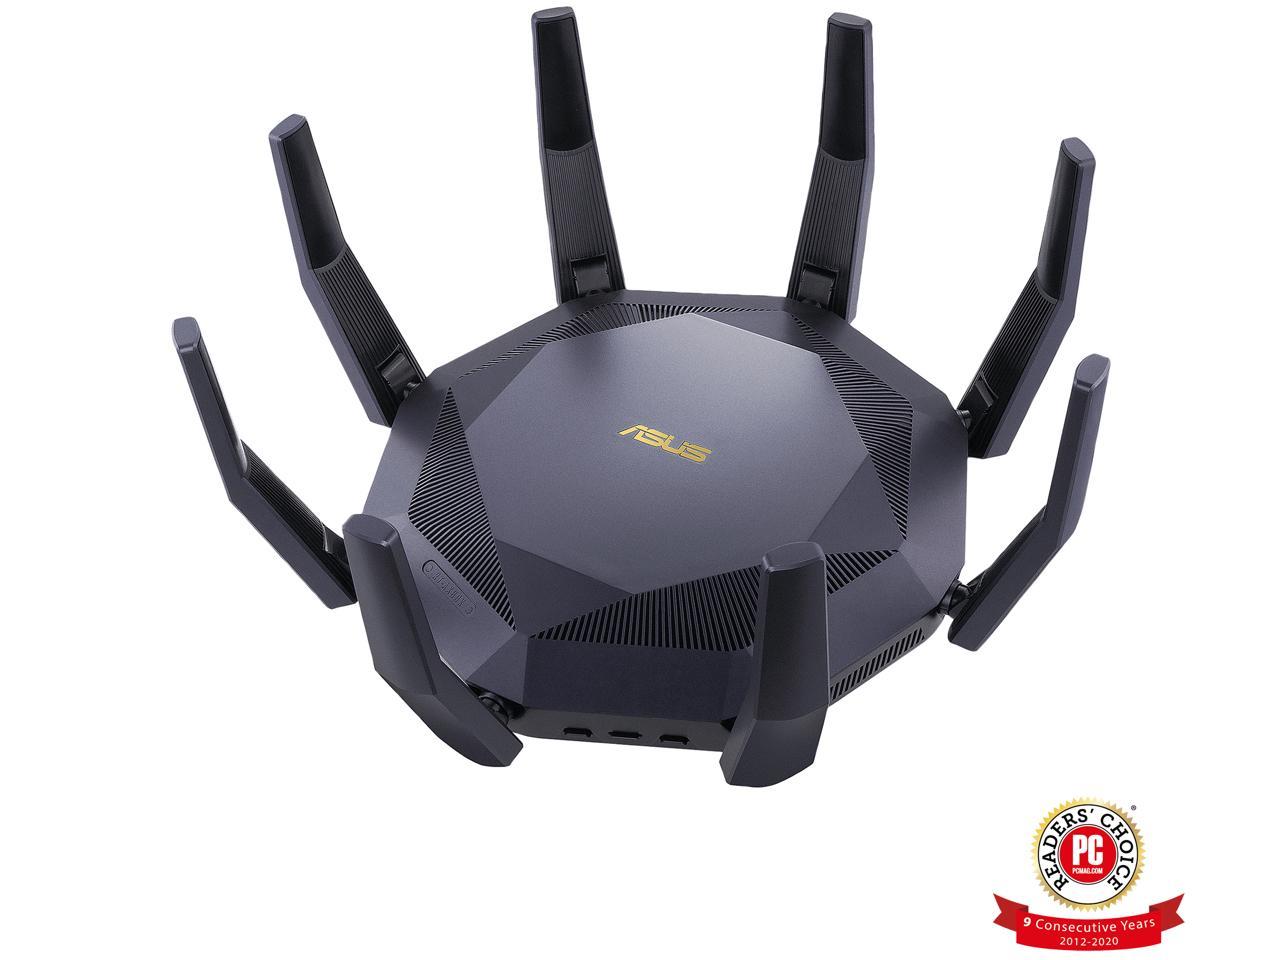 ASUS RT-AX89X AX6000 Dual Band WiFi 6 Router, Newegg.com